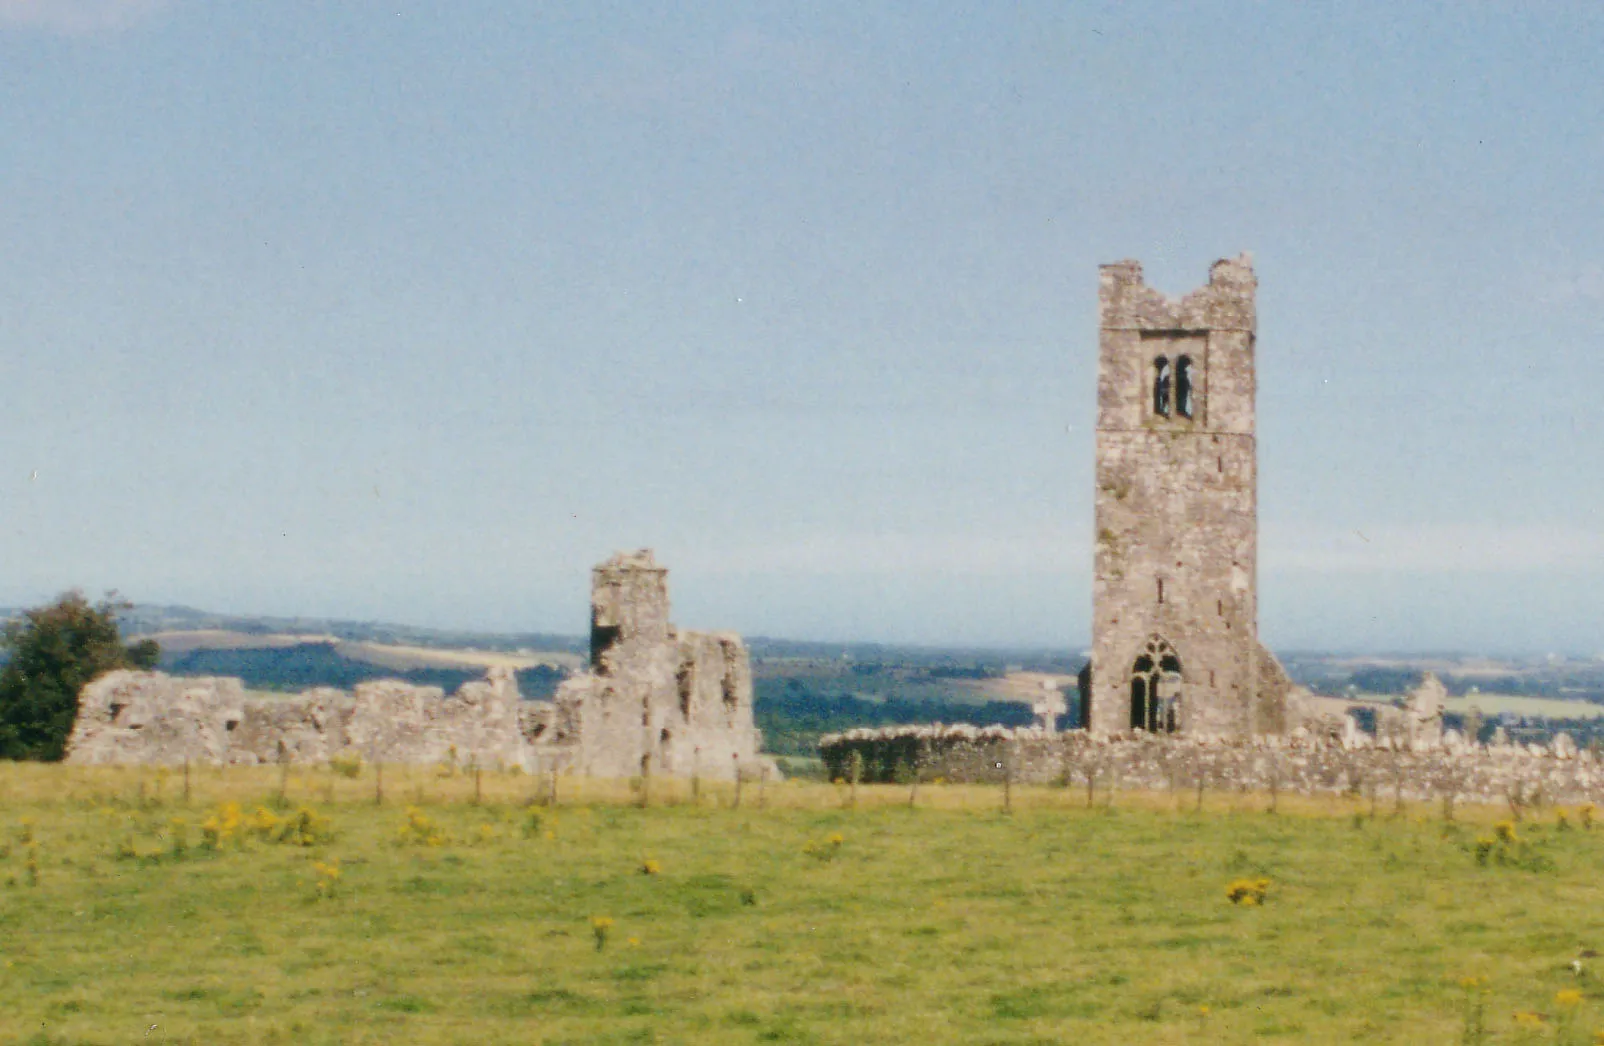 Photo showing: Ruins of the friary church and collage on the Hill of Slane near Slane in Ireland.